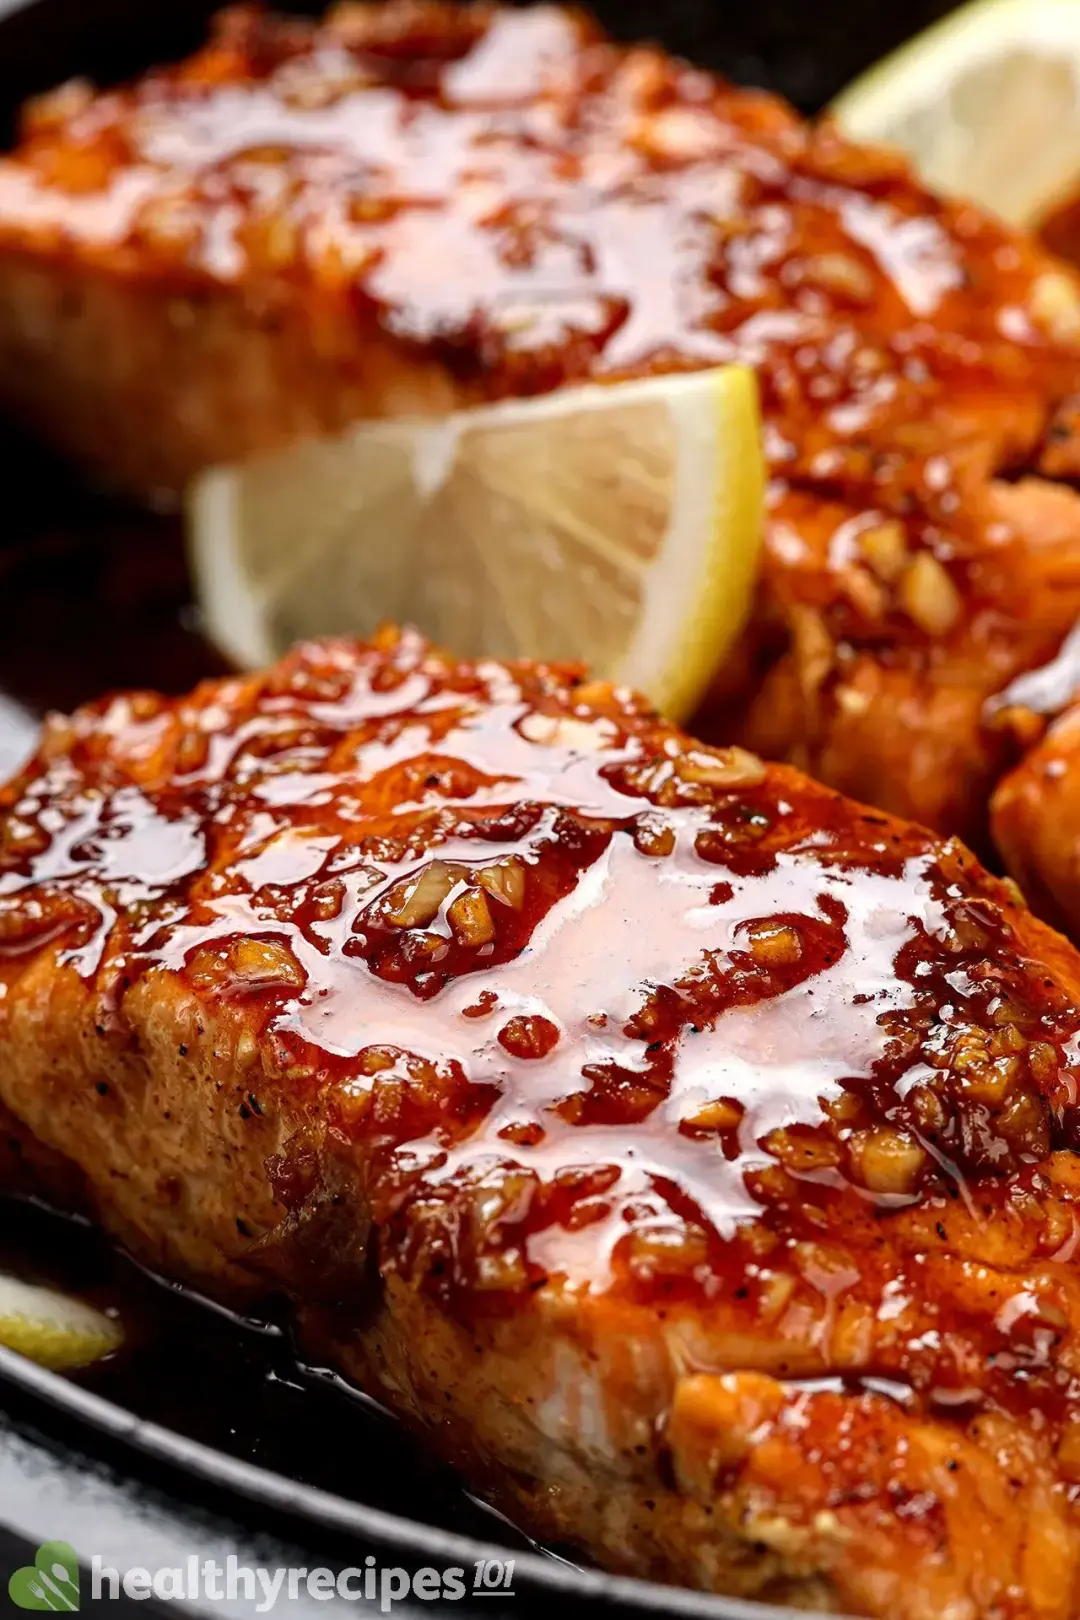 A close-up picture of two honey garlic salmon fillets garnished with two slices of lemon